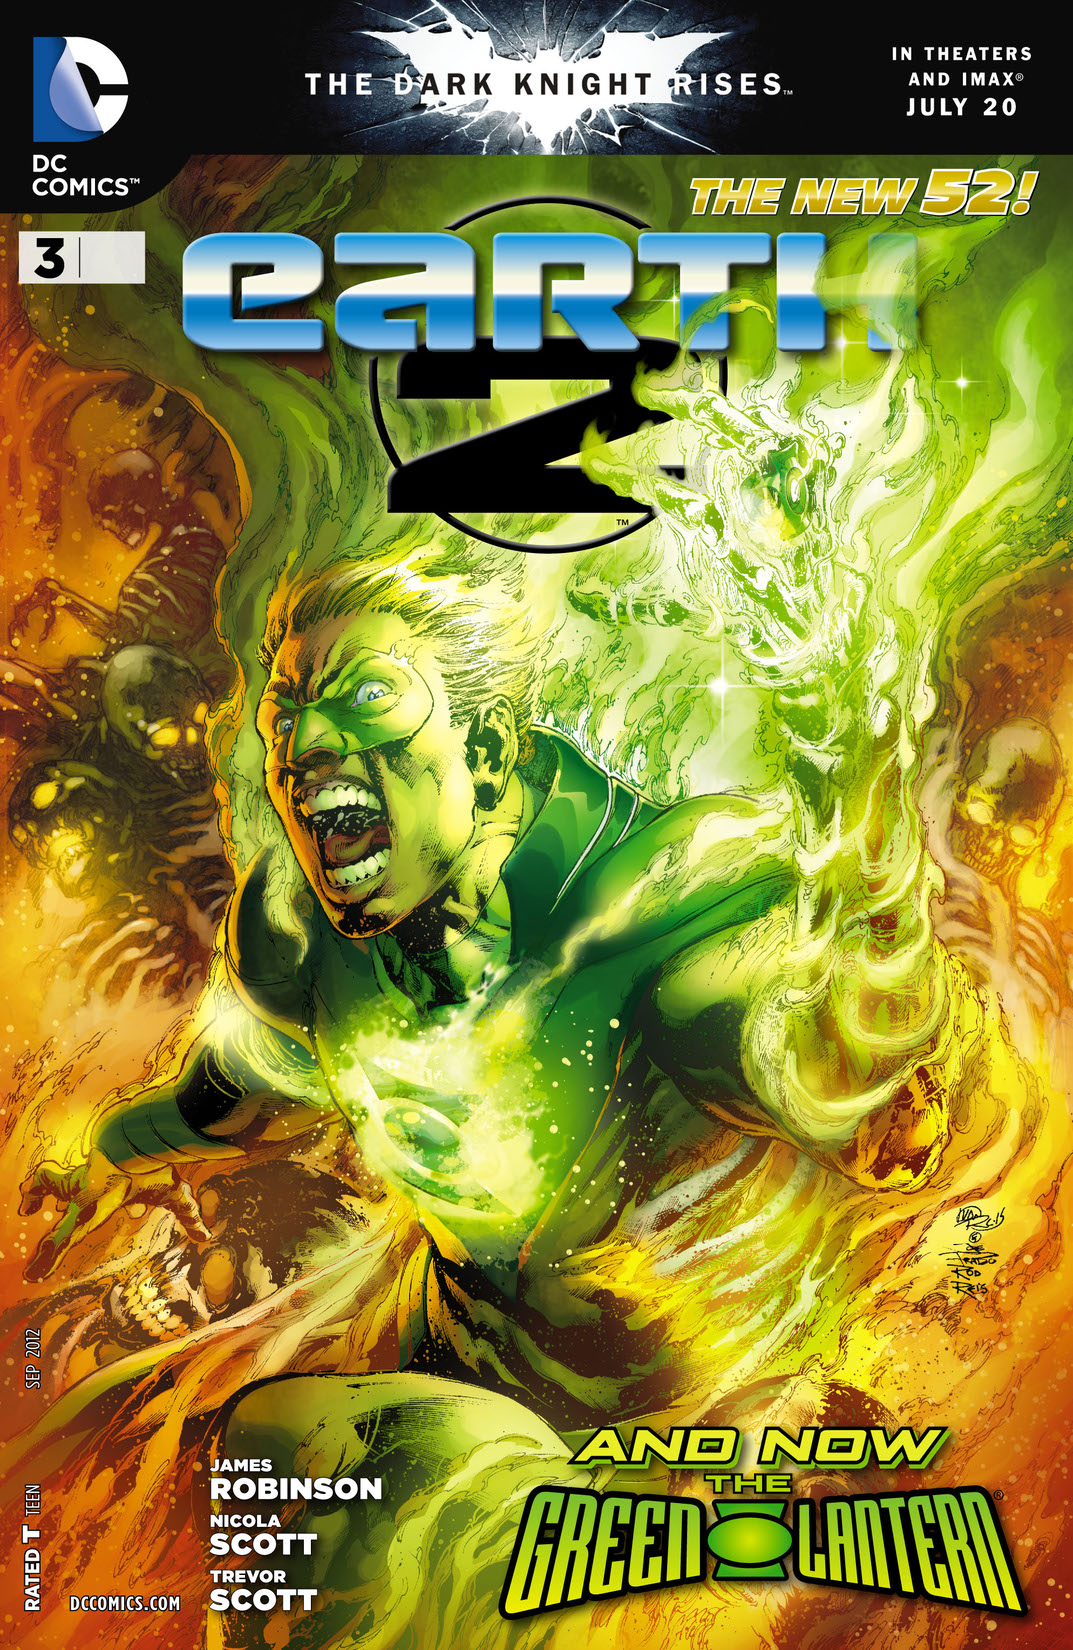 Earth 2 #3 preview images